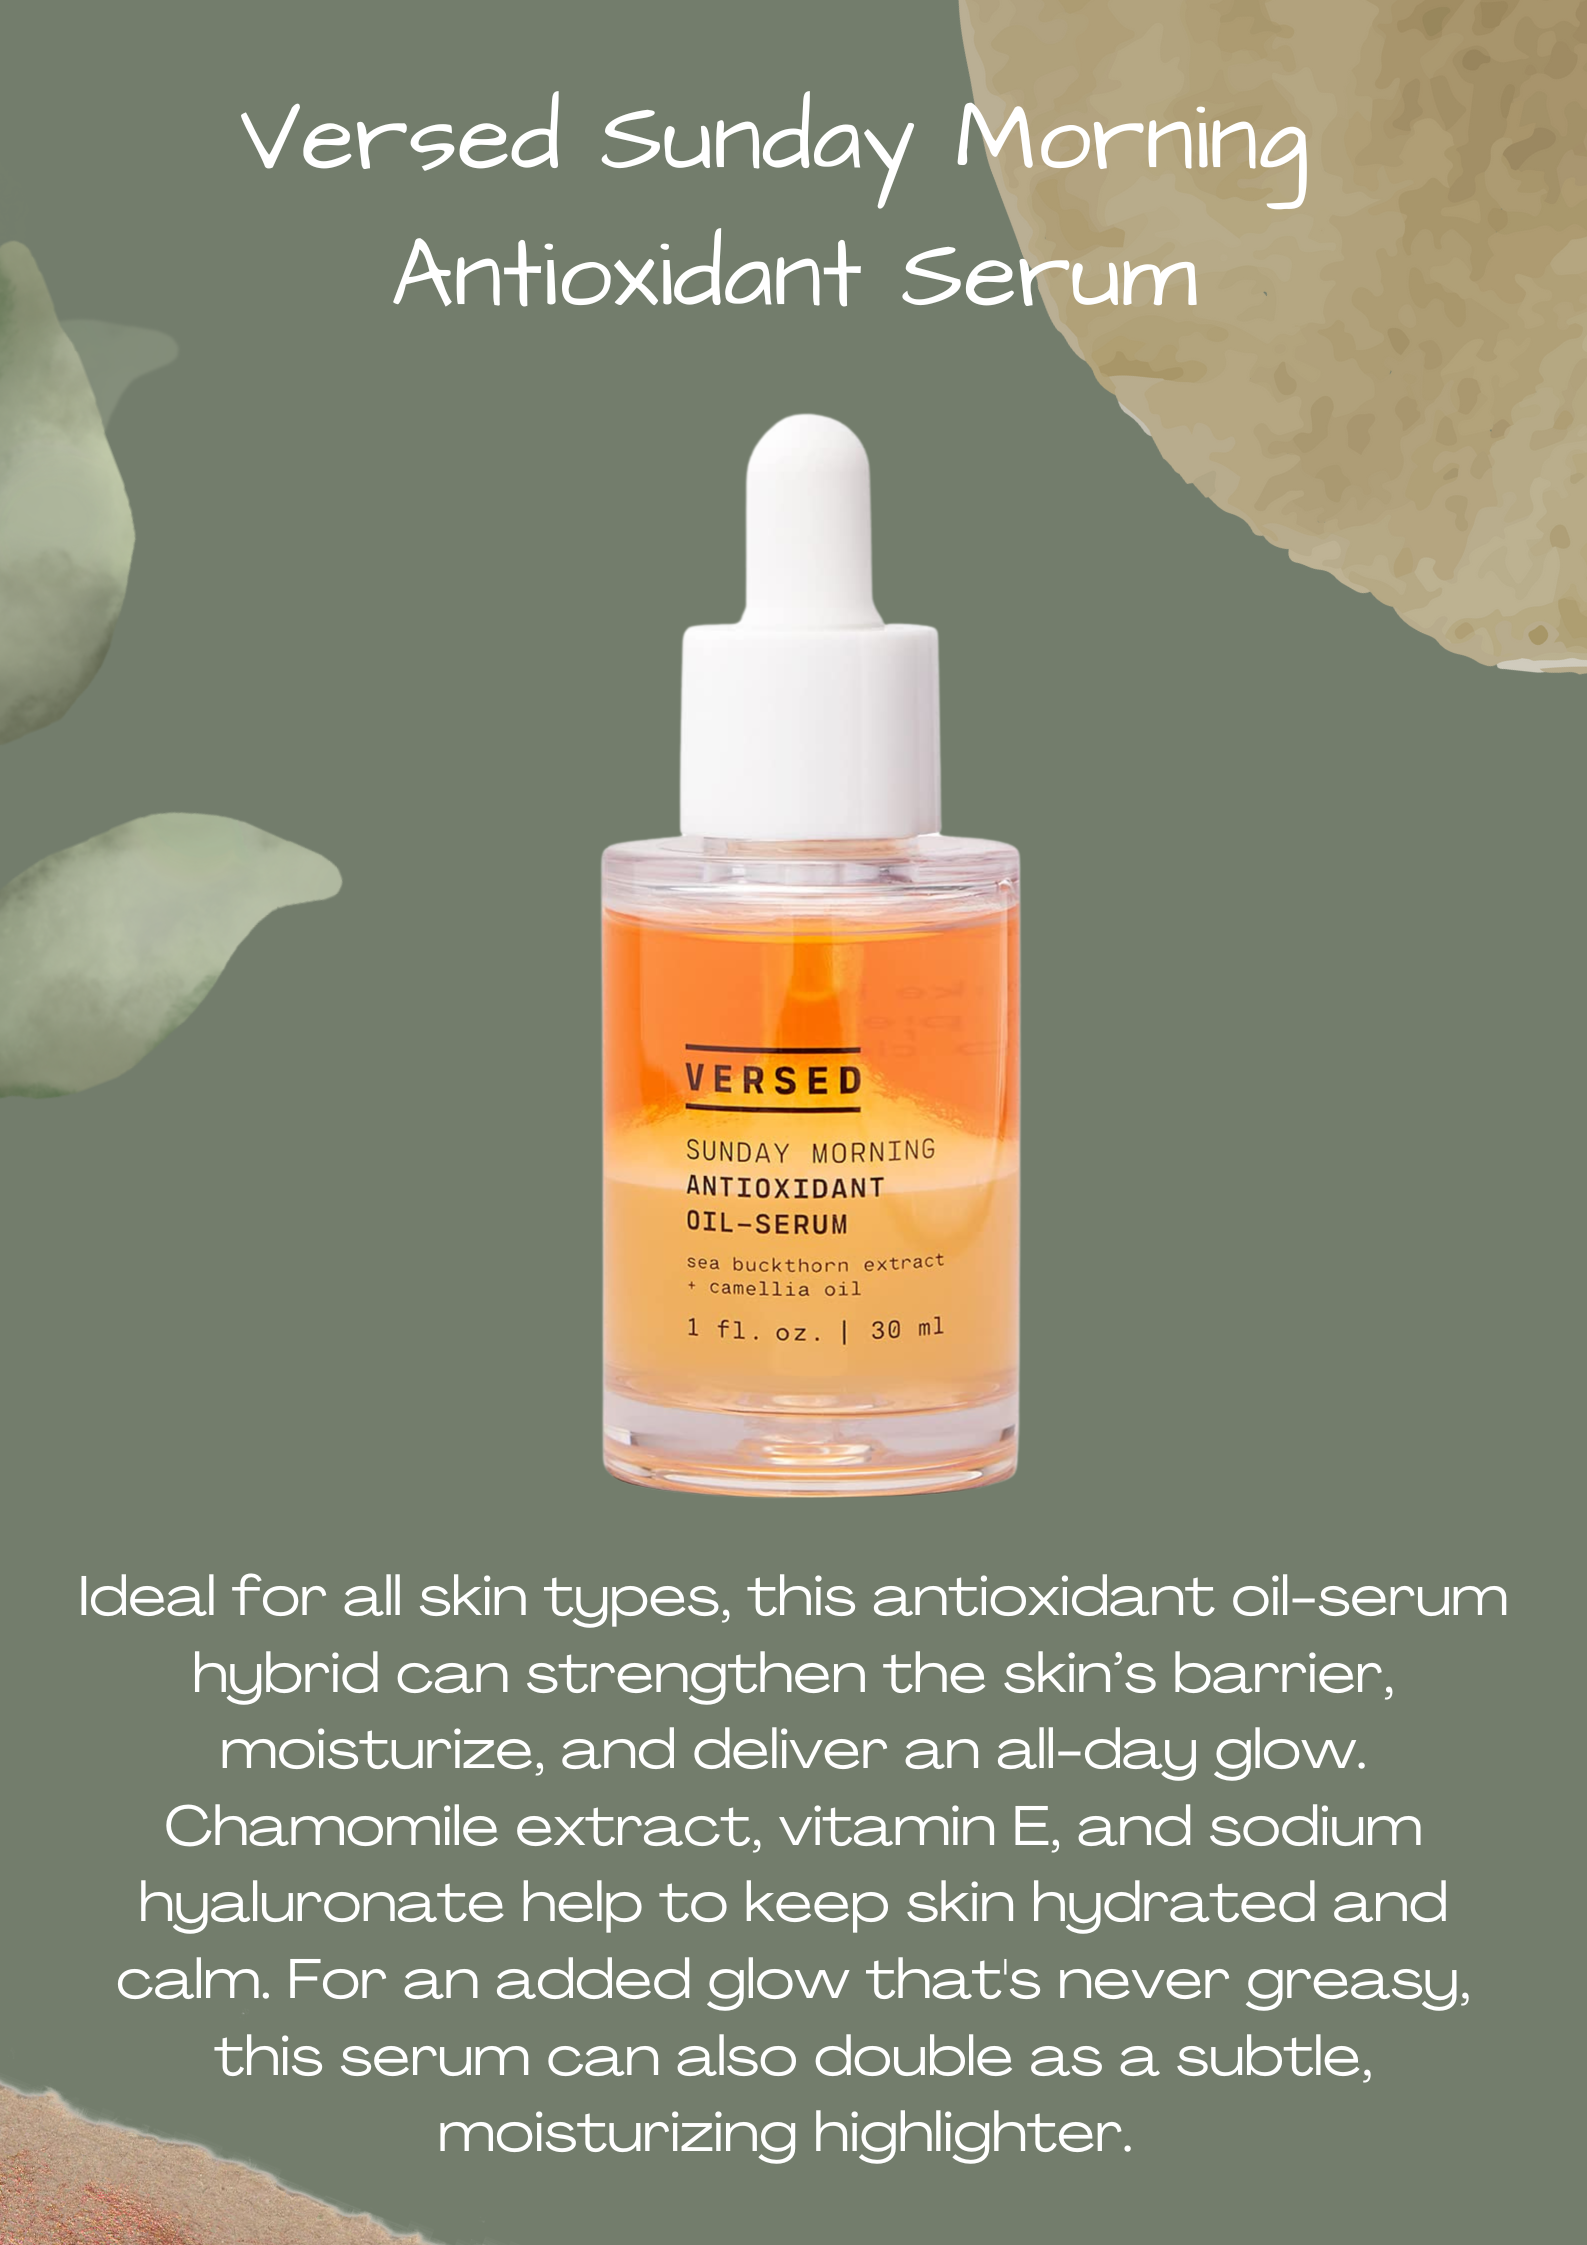 Versed Sunday Morning Antioxidant Serum: Ideal for all skin types, this antioxidant oil-serum hybrid can strengthen the skin’s barrier, moisturize, and deliver an all-day glow. Chamomile extract, vitamin E, and sodium hyaluronate help to keep skin hydrated and calm. For an added glow that's never greasy, this serum can also double as a subtle, moisturizing highlighter. 